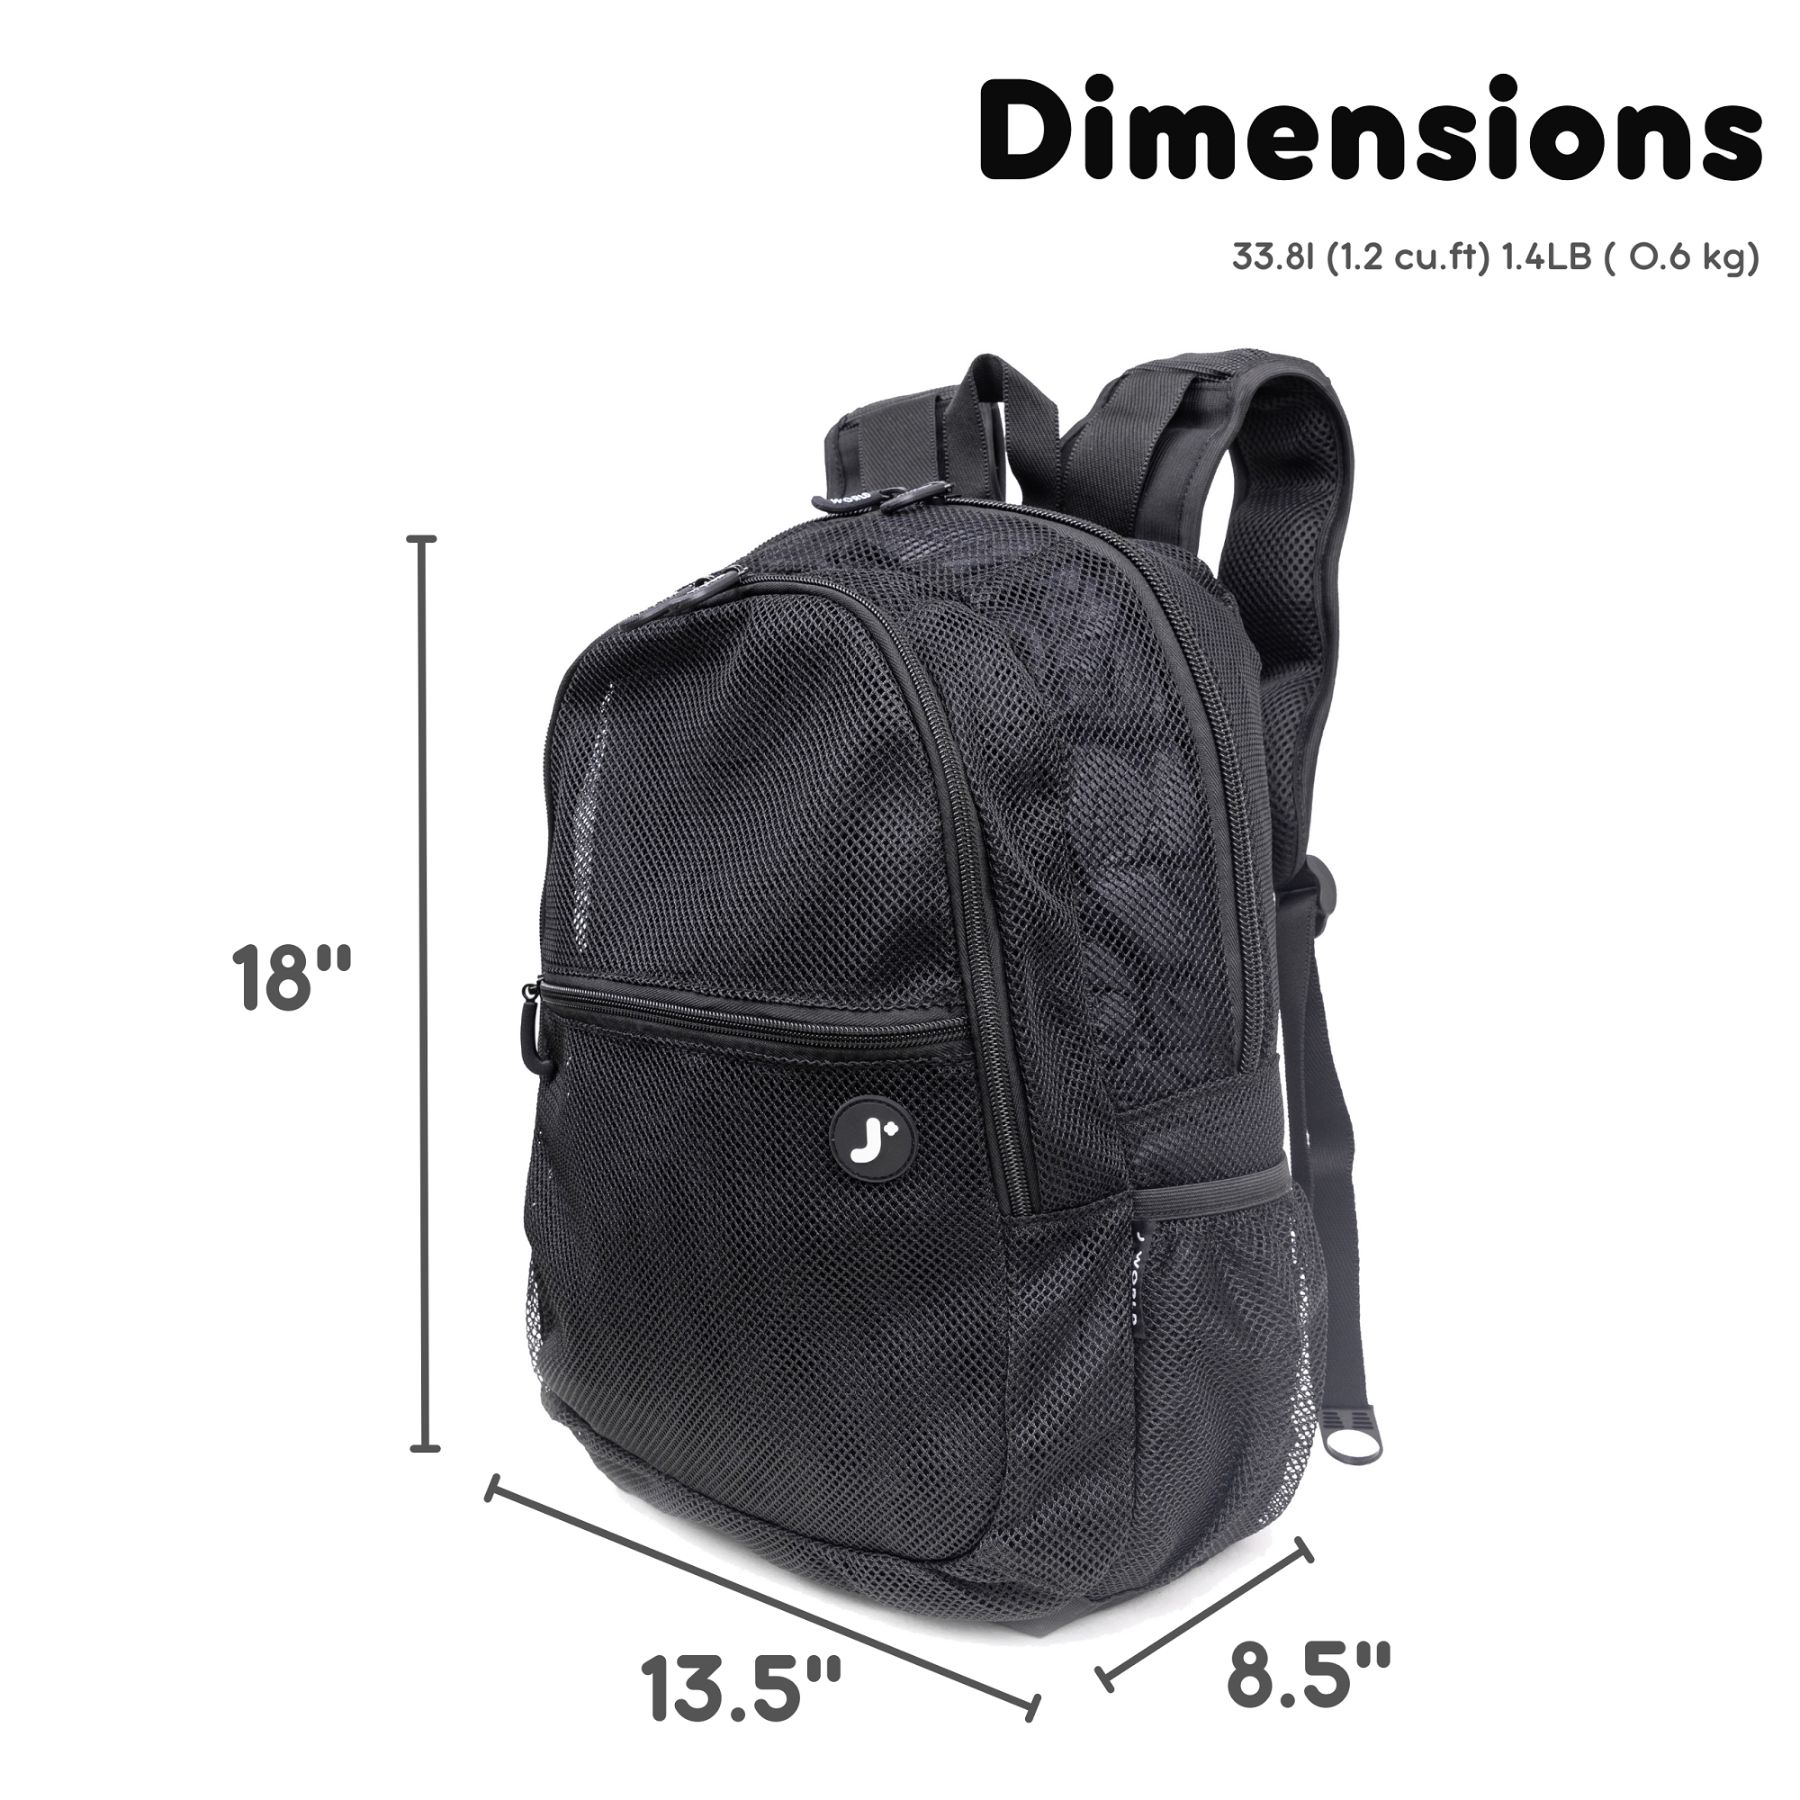 J World 18" Mesh Backpack for School and Travel, Black - image 3 of 7